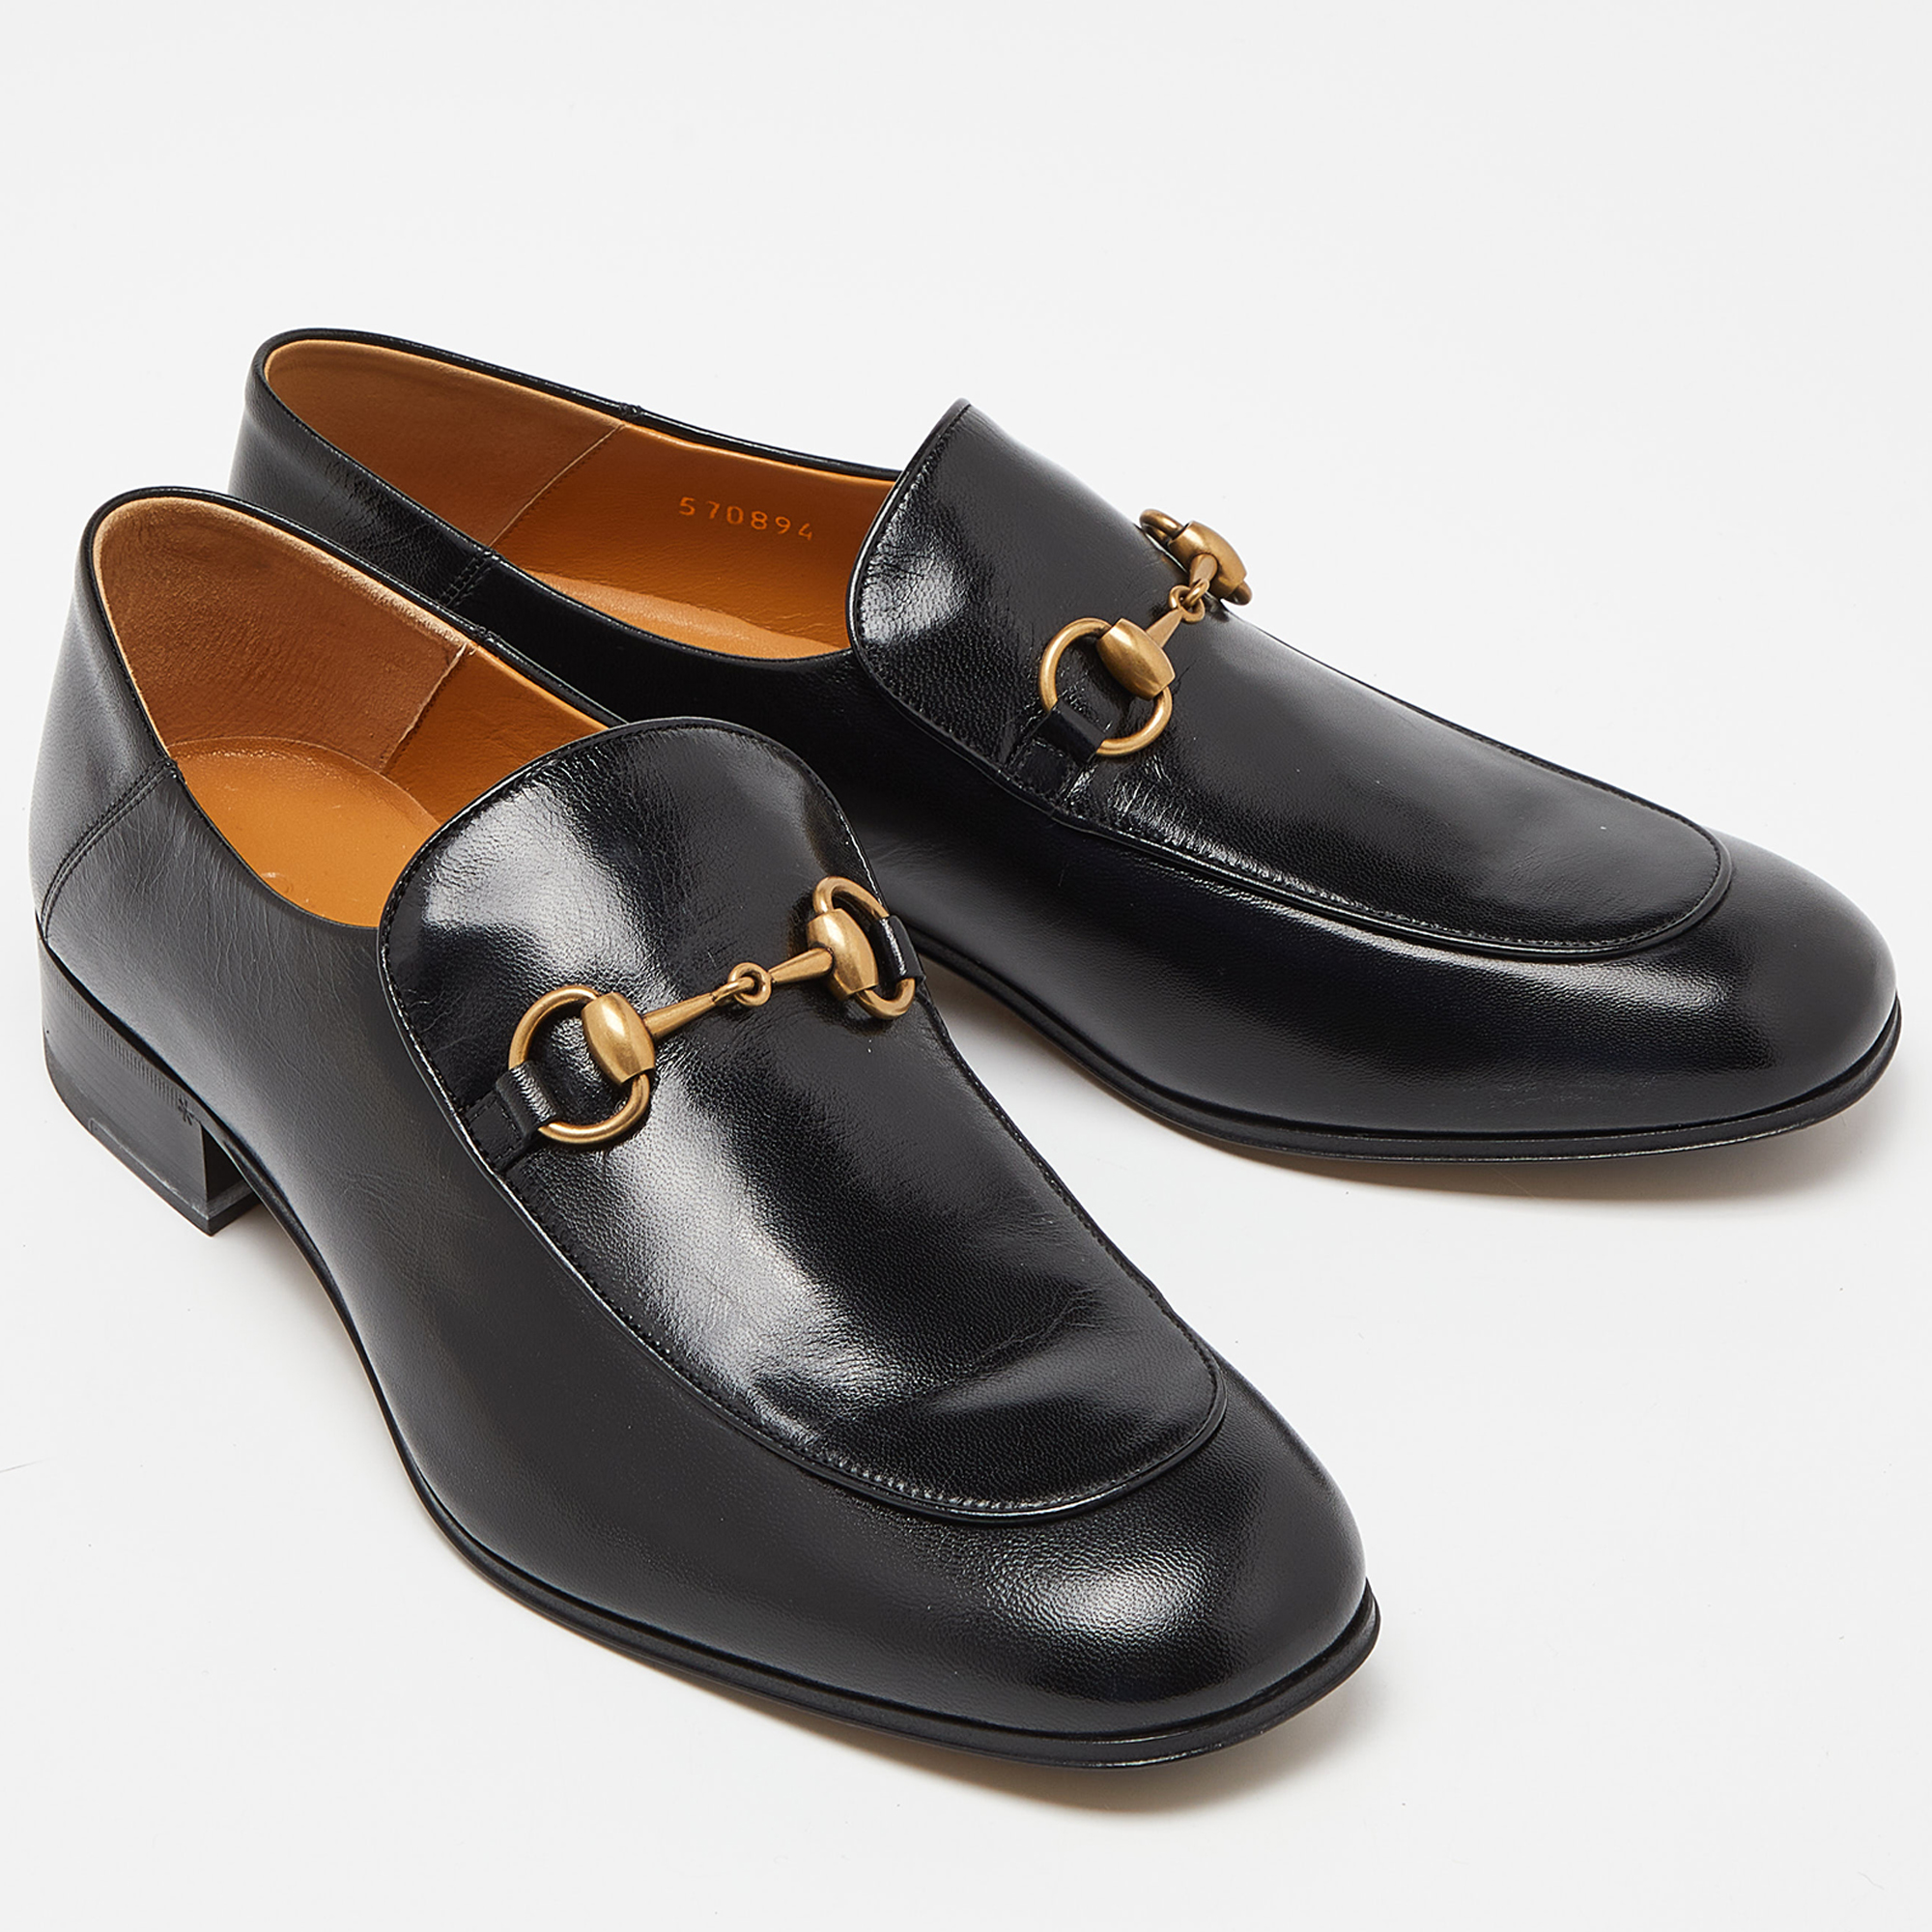 Gucci Black Leather Horsebit Loafers Size 43.5